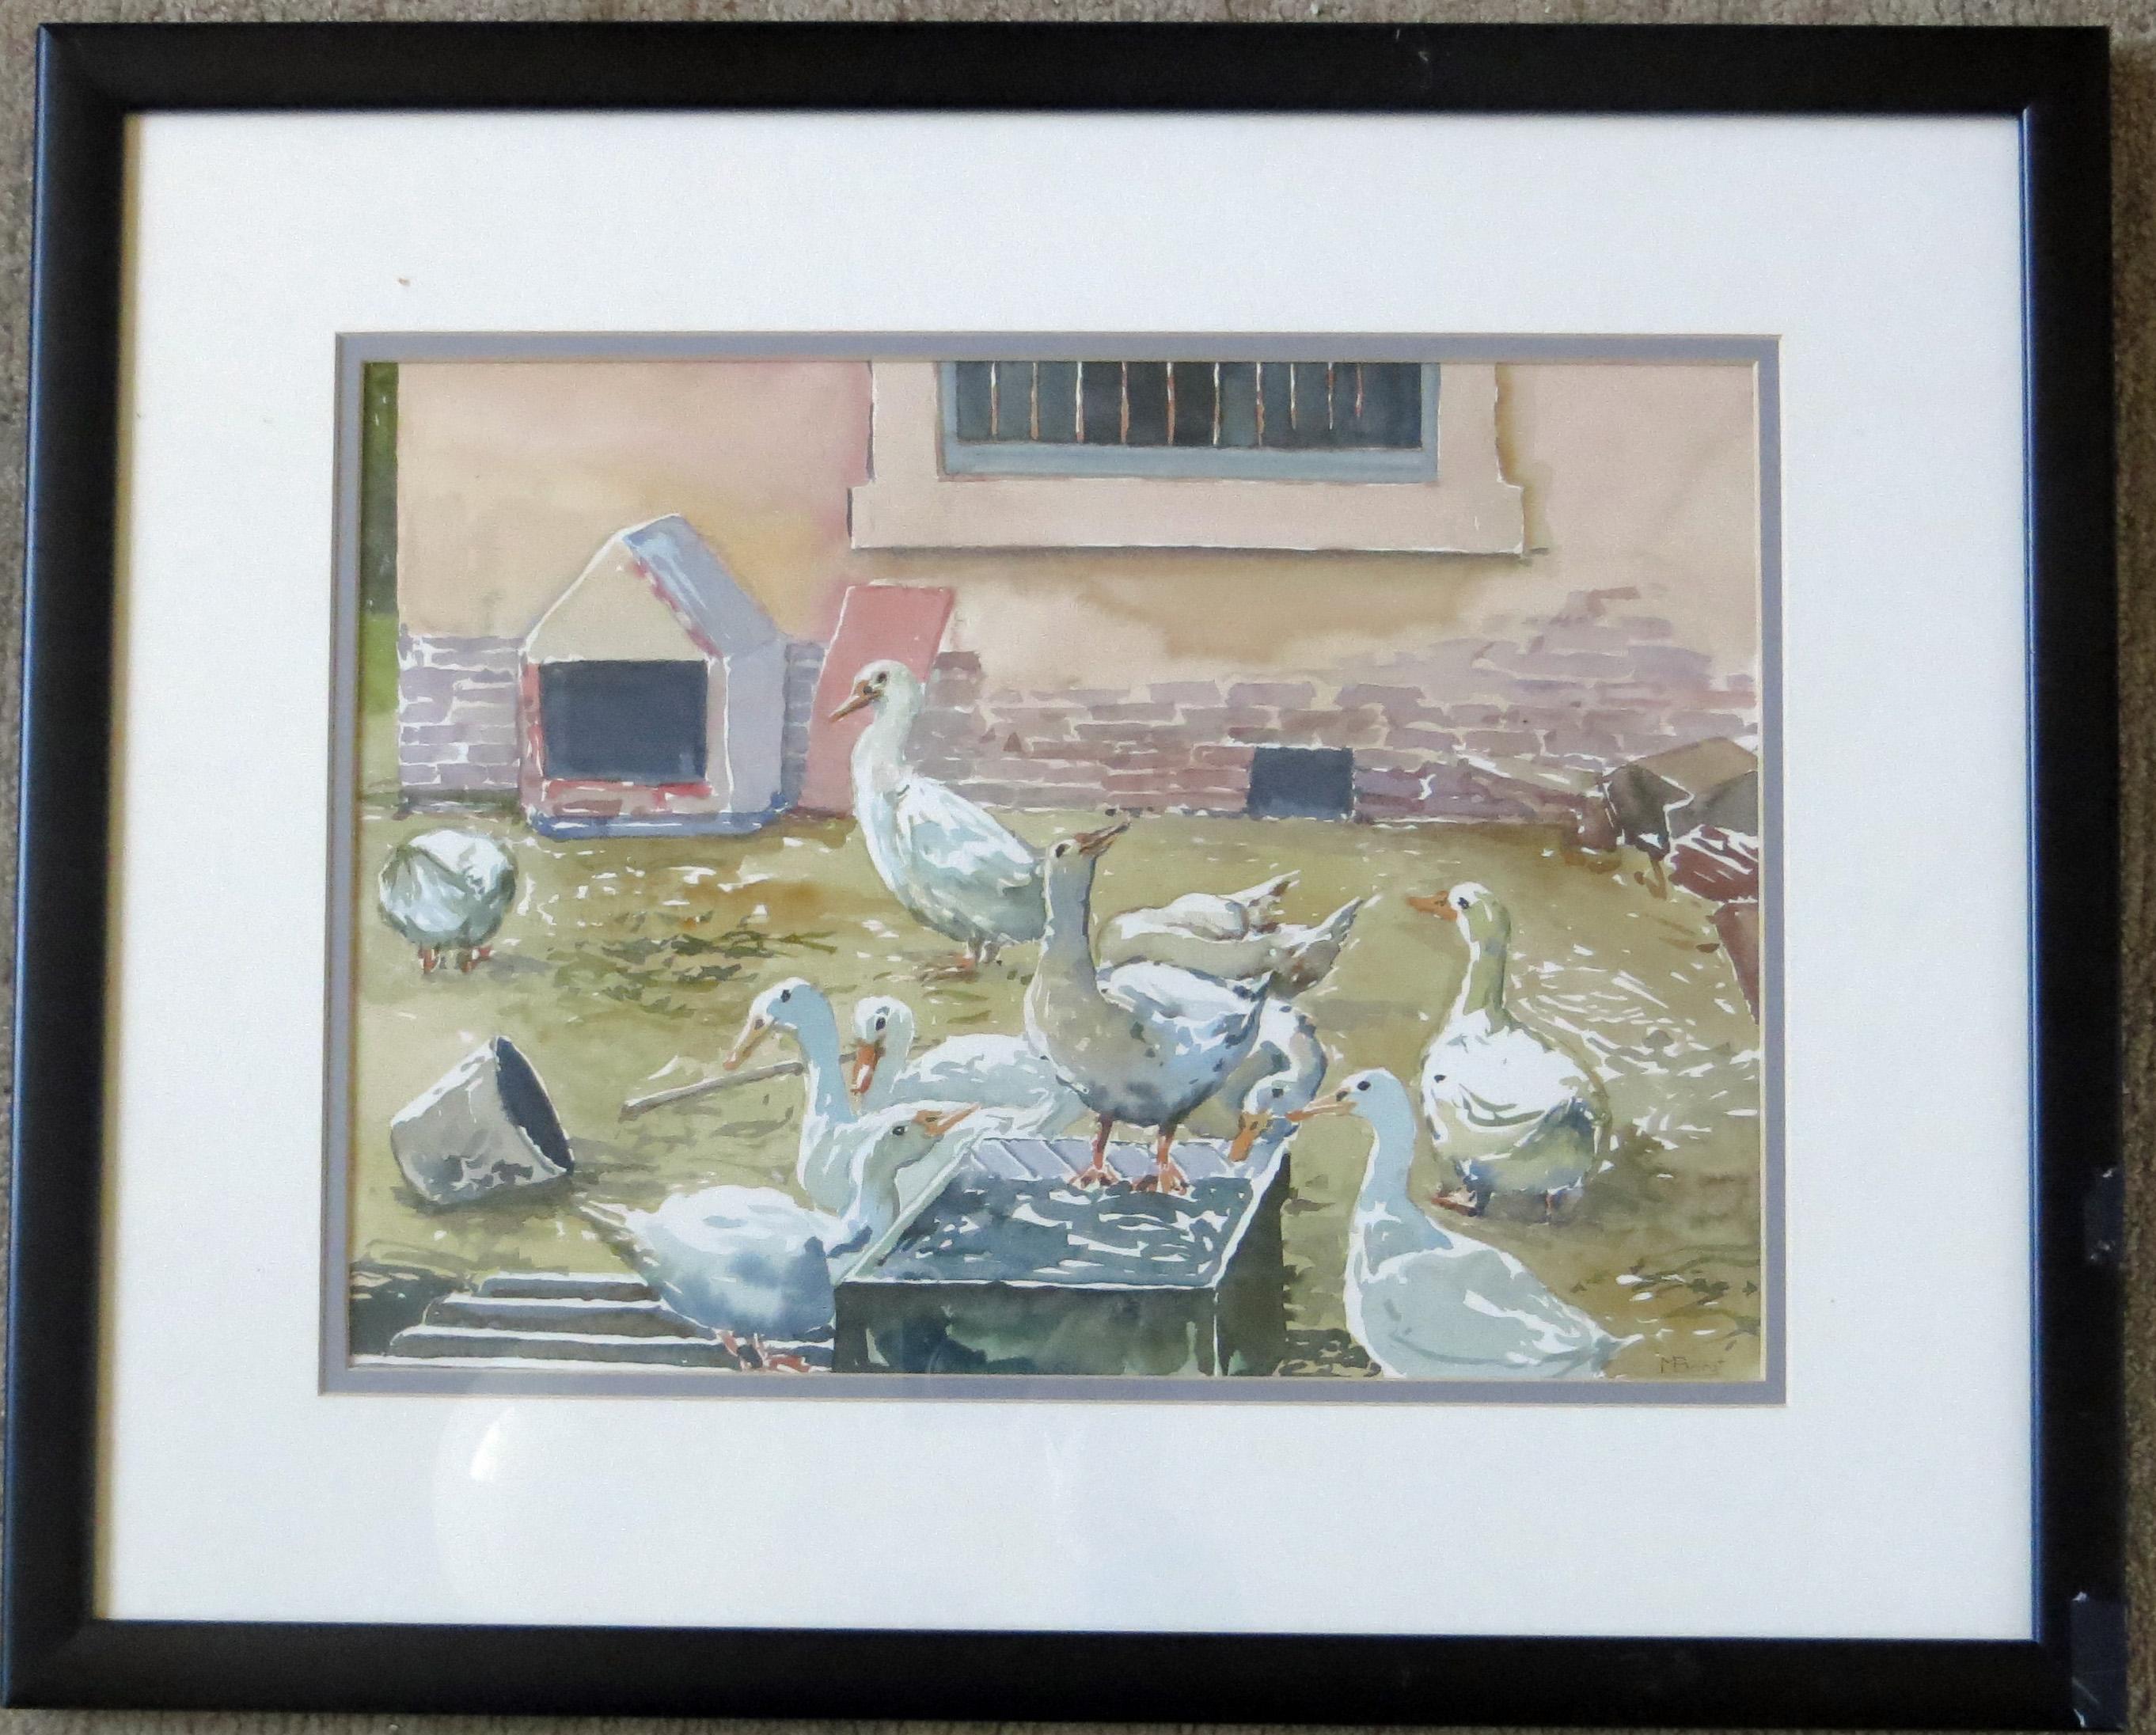 Artist: Michael Bergt – American (1956- )
Title: Untitled
Year: unknown, circa 1985
Medium: Watercolor
Sight size: 10.5 x 14.5 inches. 
Framed size: 17.5 x 21.5 inches 
Signature: Signed lower right
Condition: Very good 
Frame: Framed in simple